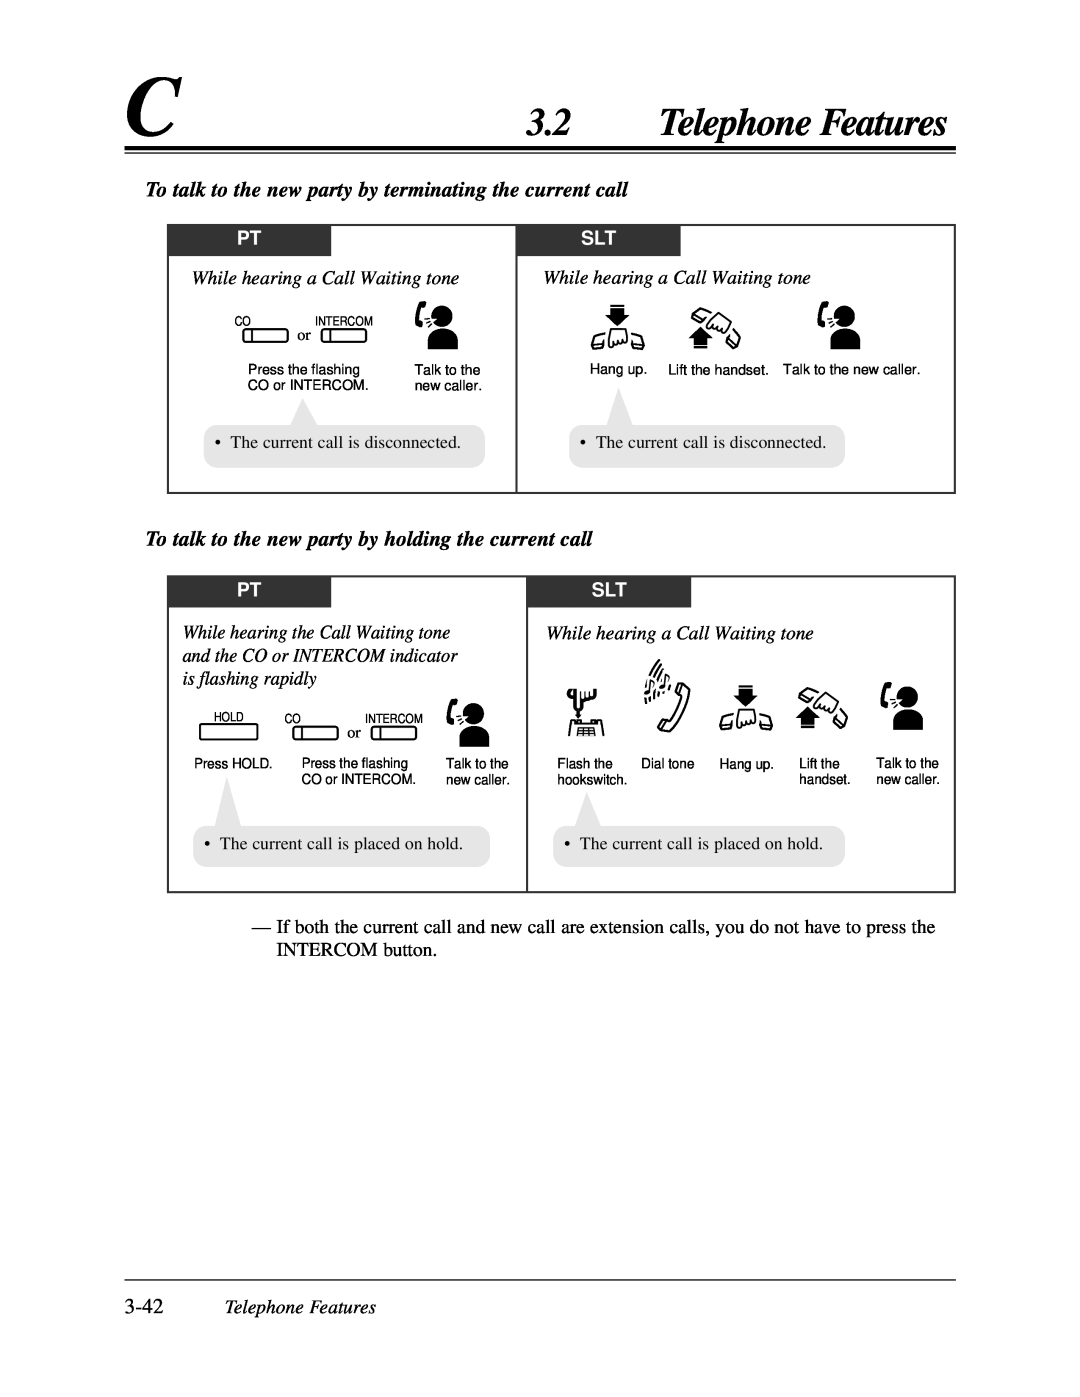 Panasonic KX-TA624 user manual 3.2Telephone Features, While hearing a Call Waiting tone, • The current call is disconnected 